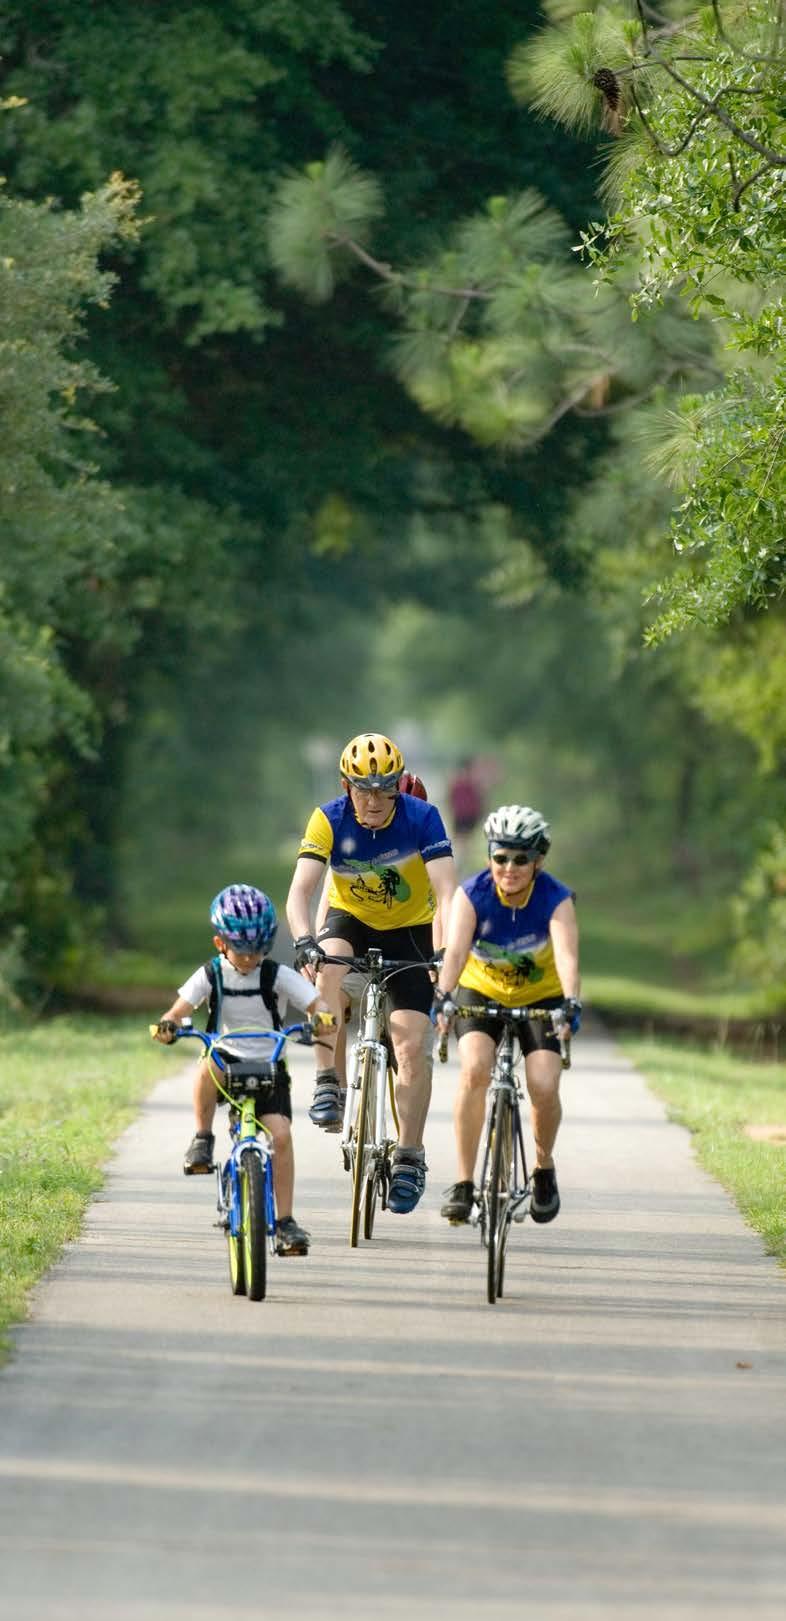 Family Biking on Trails in Tallahassee FUN FOR ALL AGES Since its earliest days, Tallahassee offered sites for exploration and discovery.